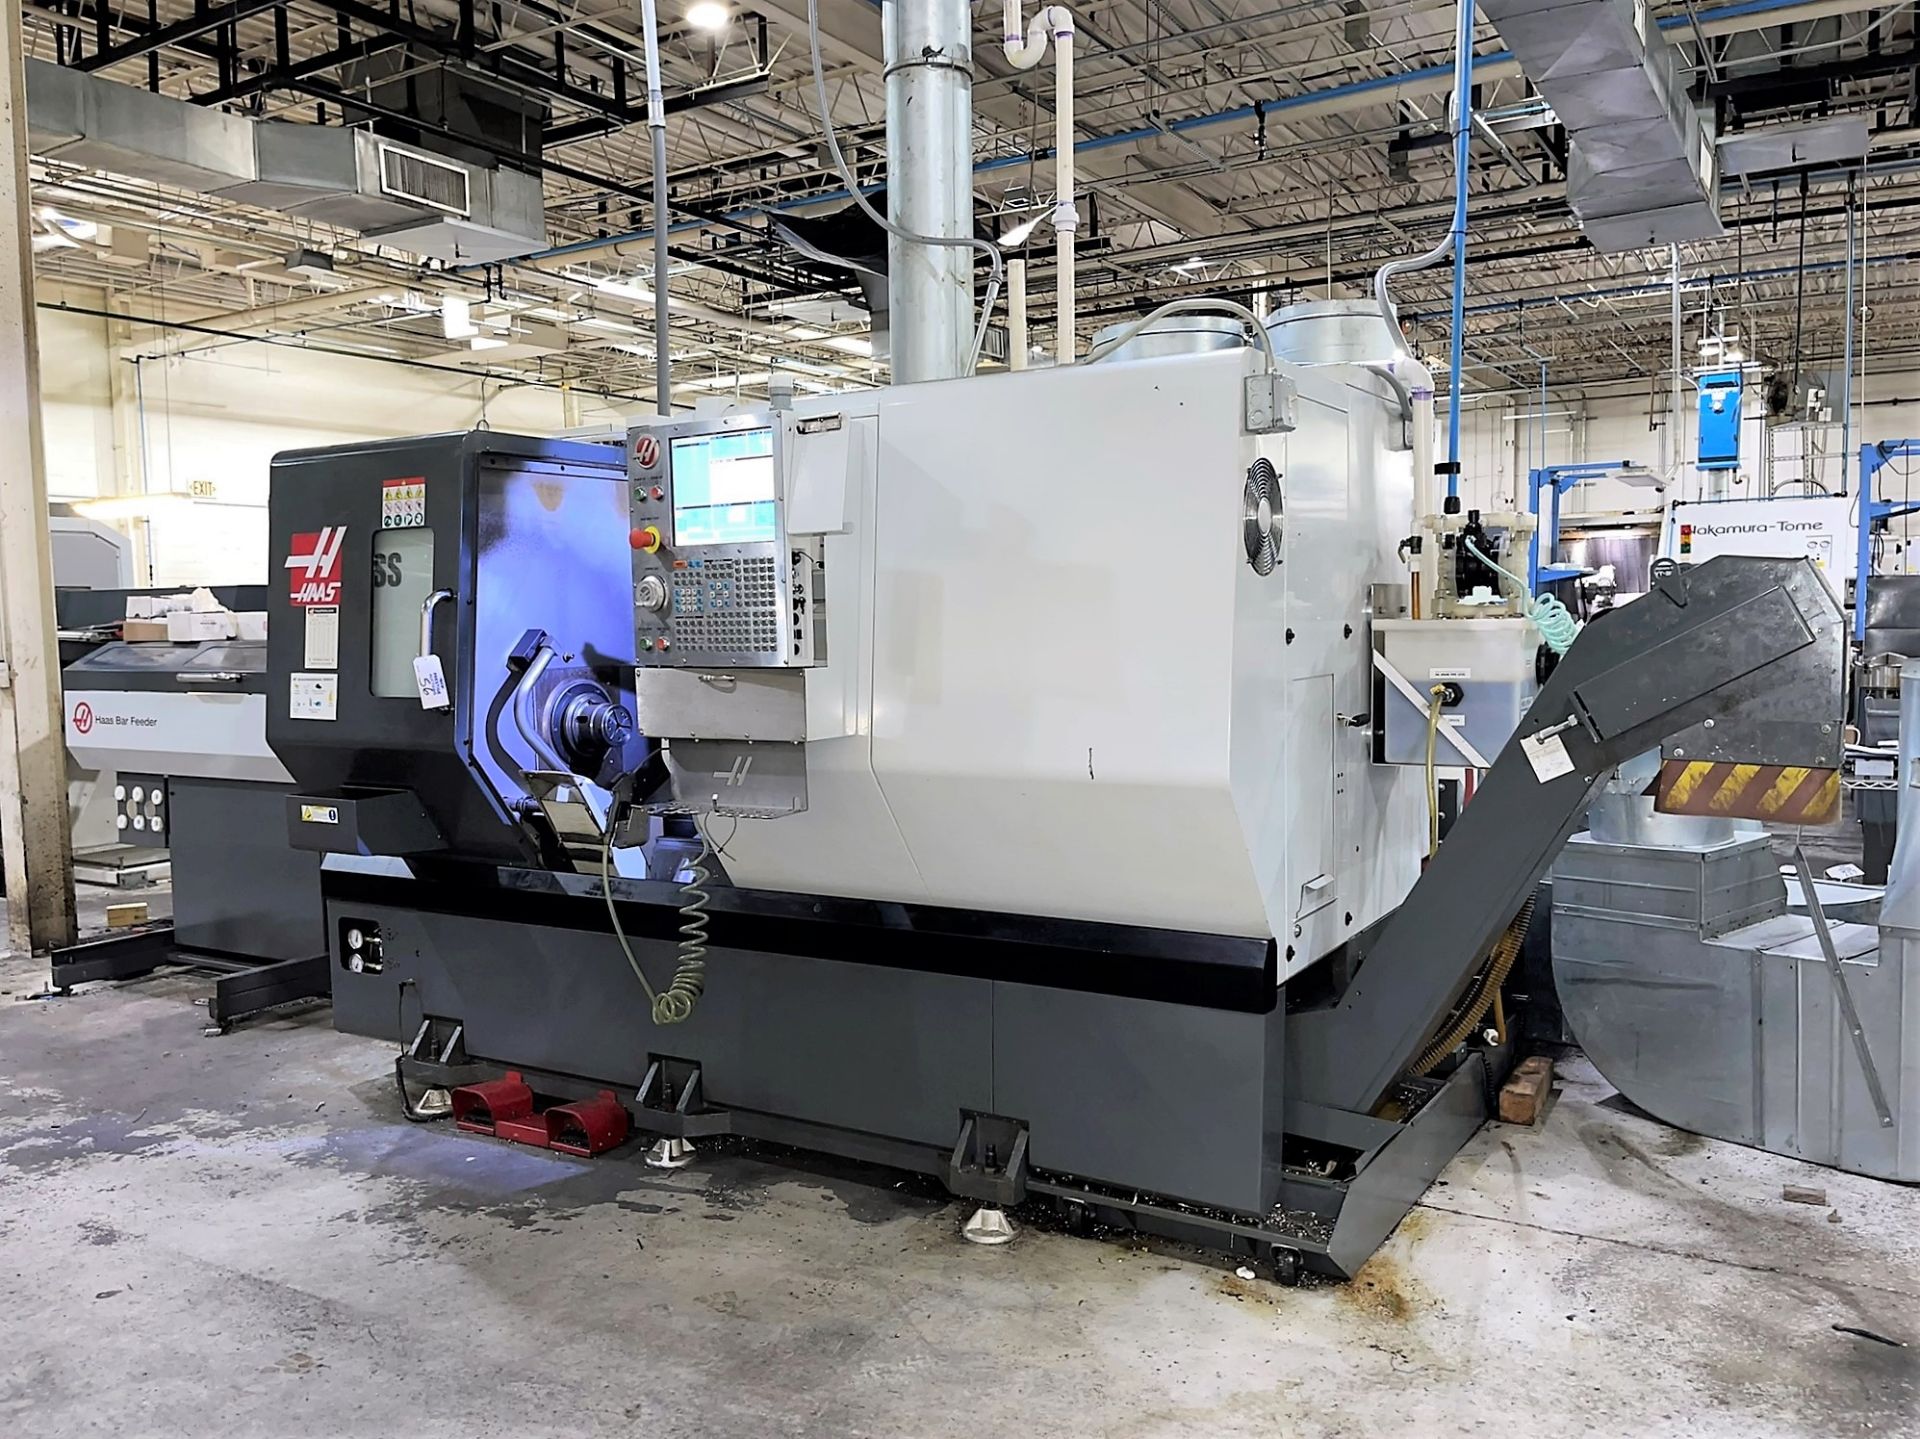 2016 Haas DS-30SS CNC Turning Center with Sub-Spindle and Live Milling, S/N 3105326